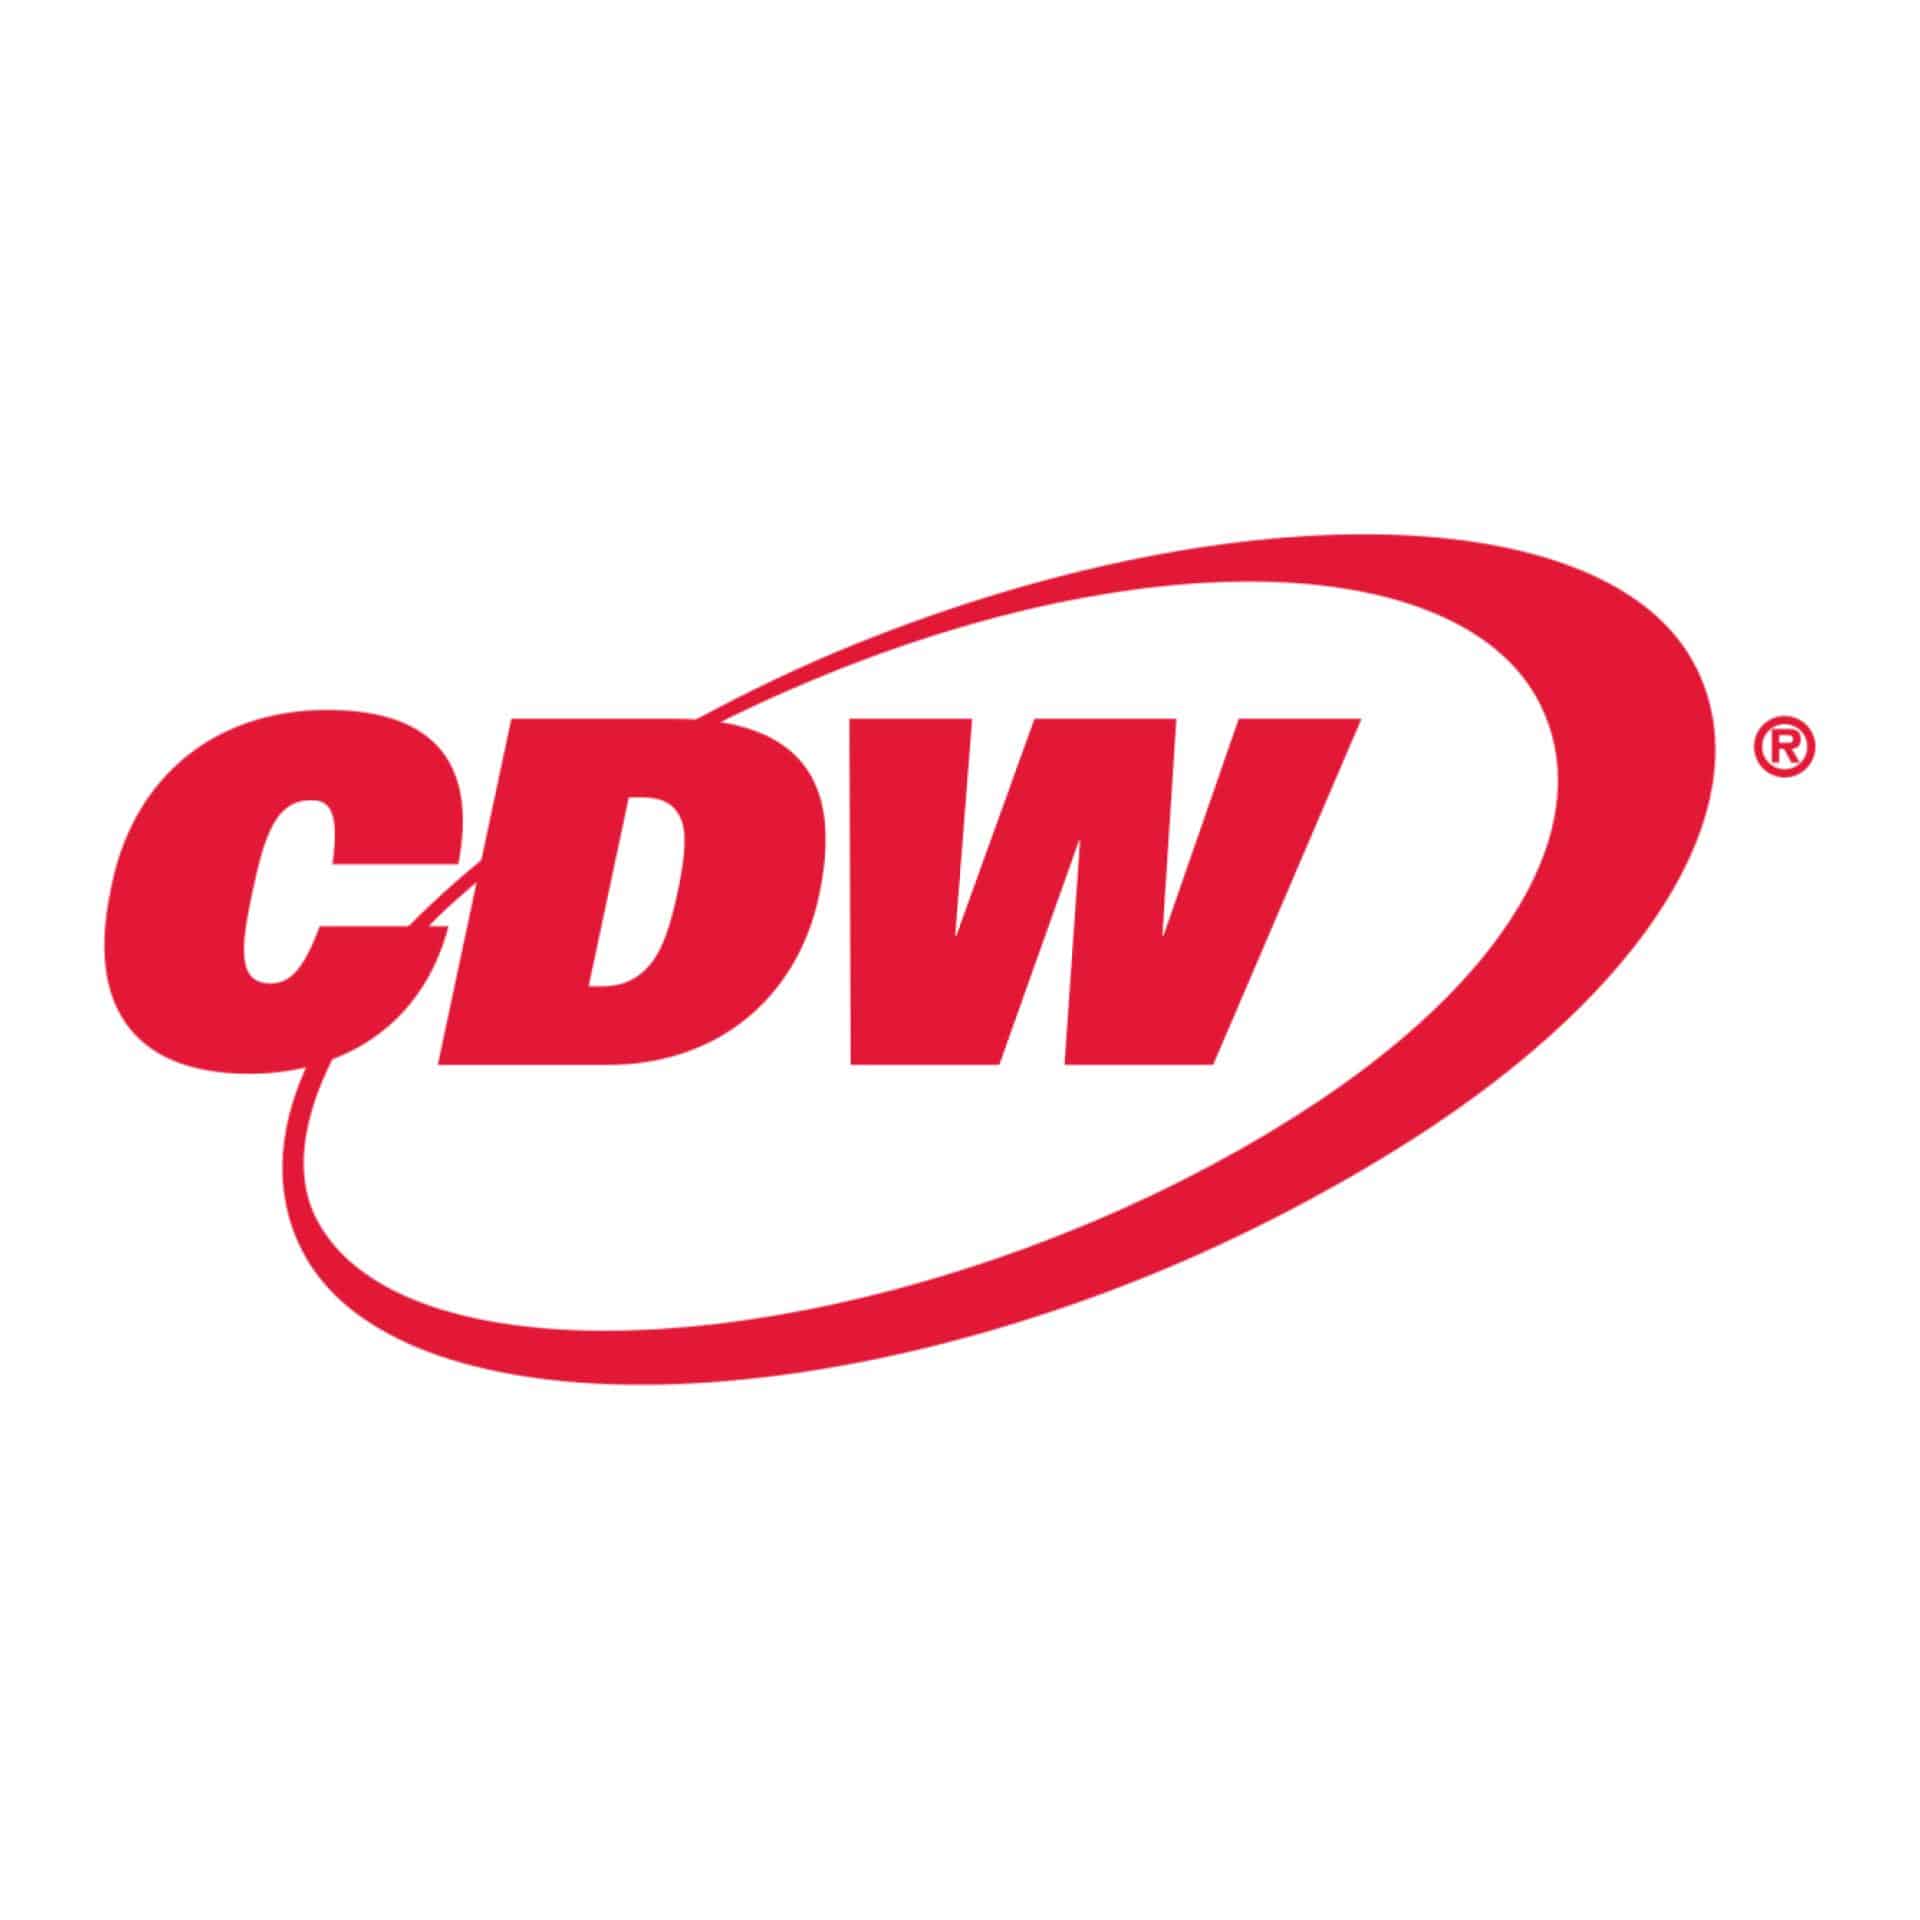 CDW: Channel Profile & Services